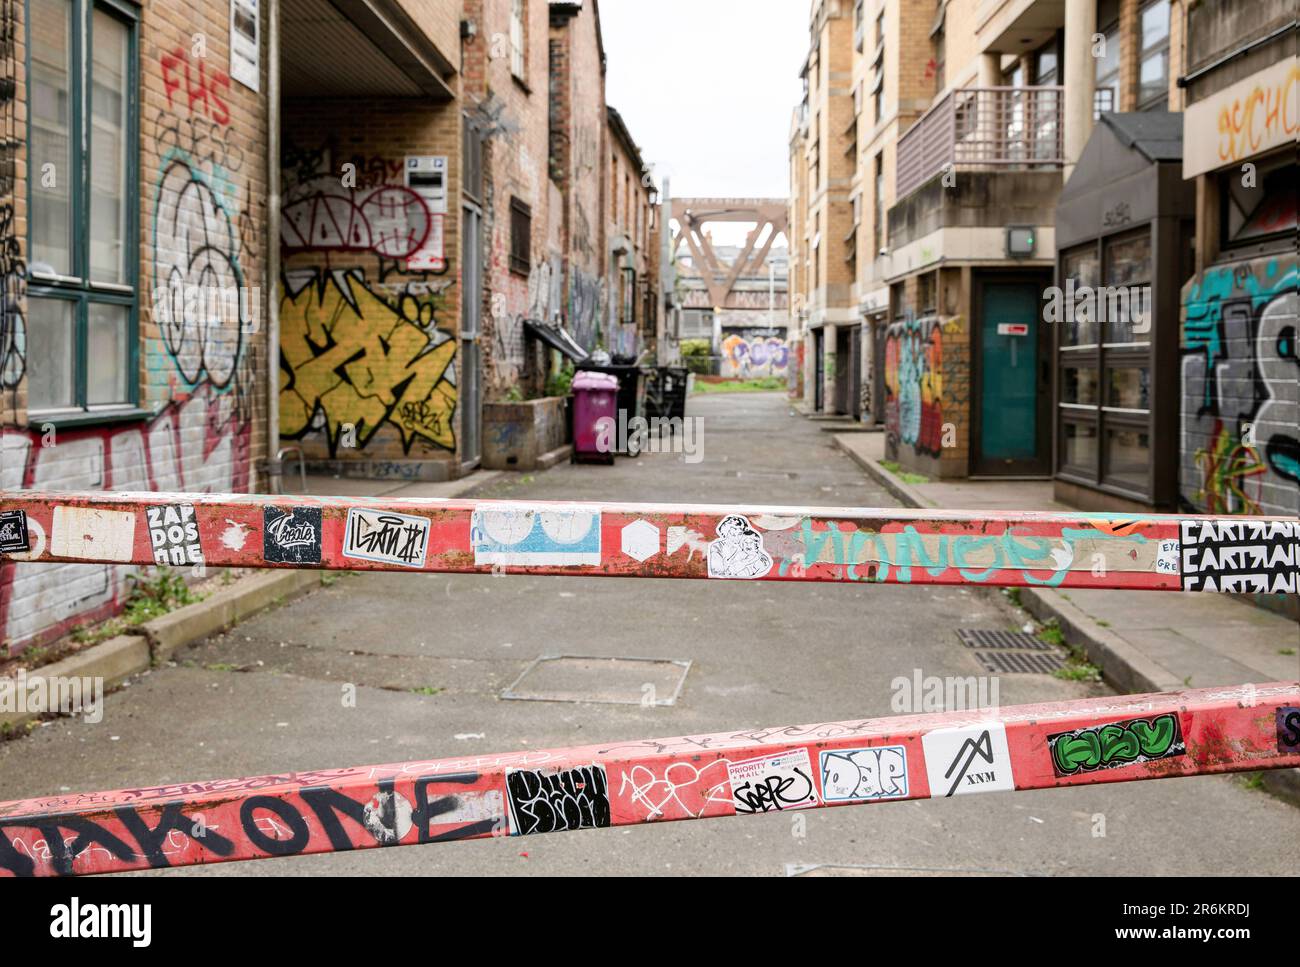 London, UK - May 17 2023: Barriers close off a back street in Shoreditch. The gritty inner city area is covered in graffiti. Stock Photo